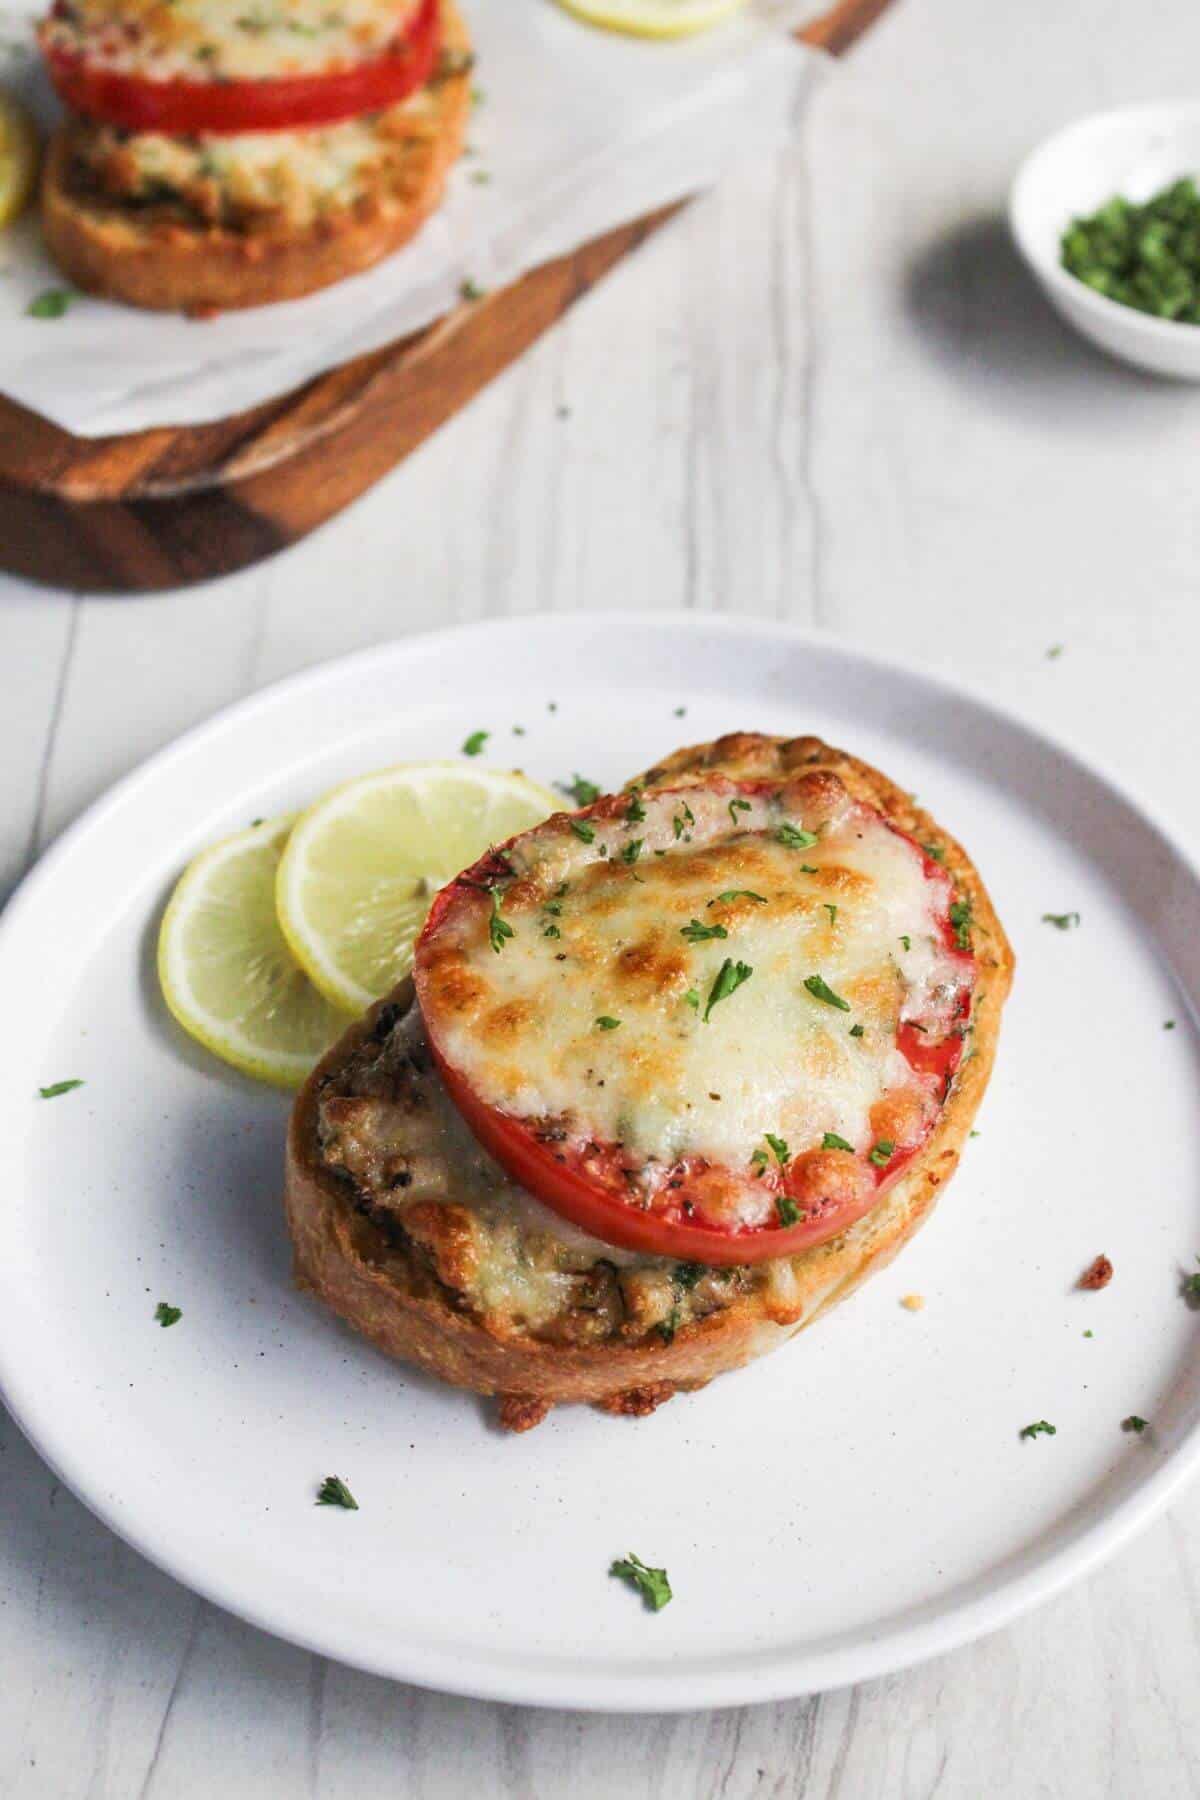 A plate with a crab melt topped with melted cheese, tomato, and herbs.